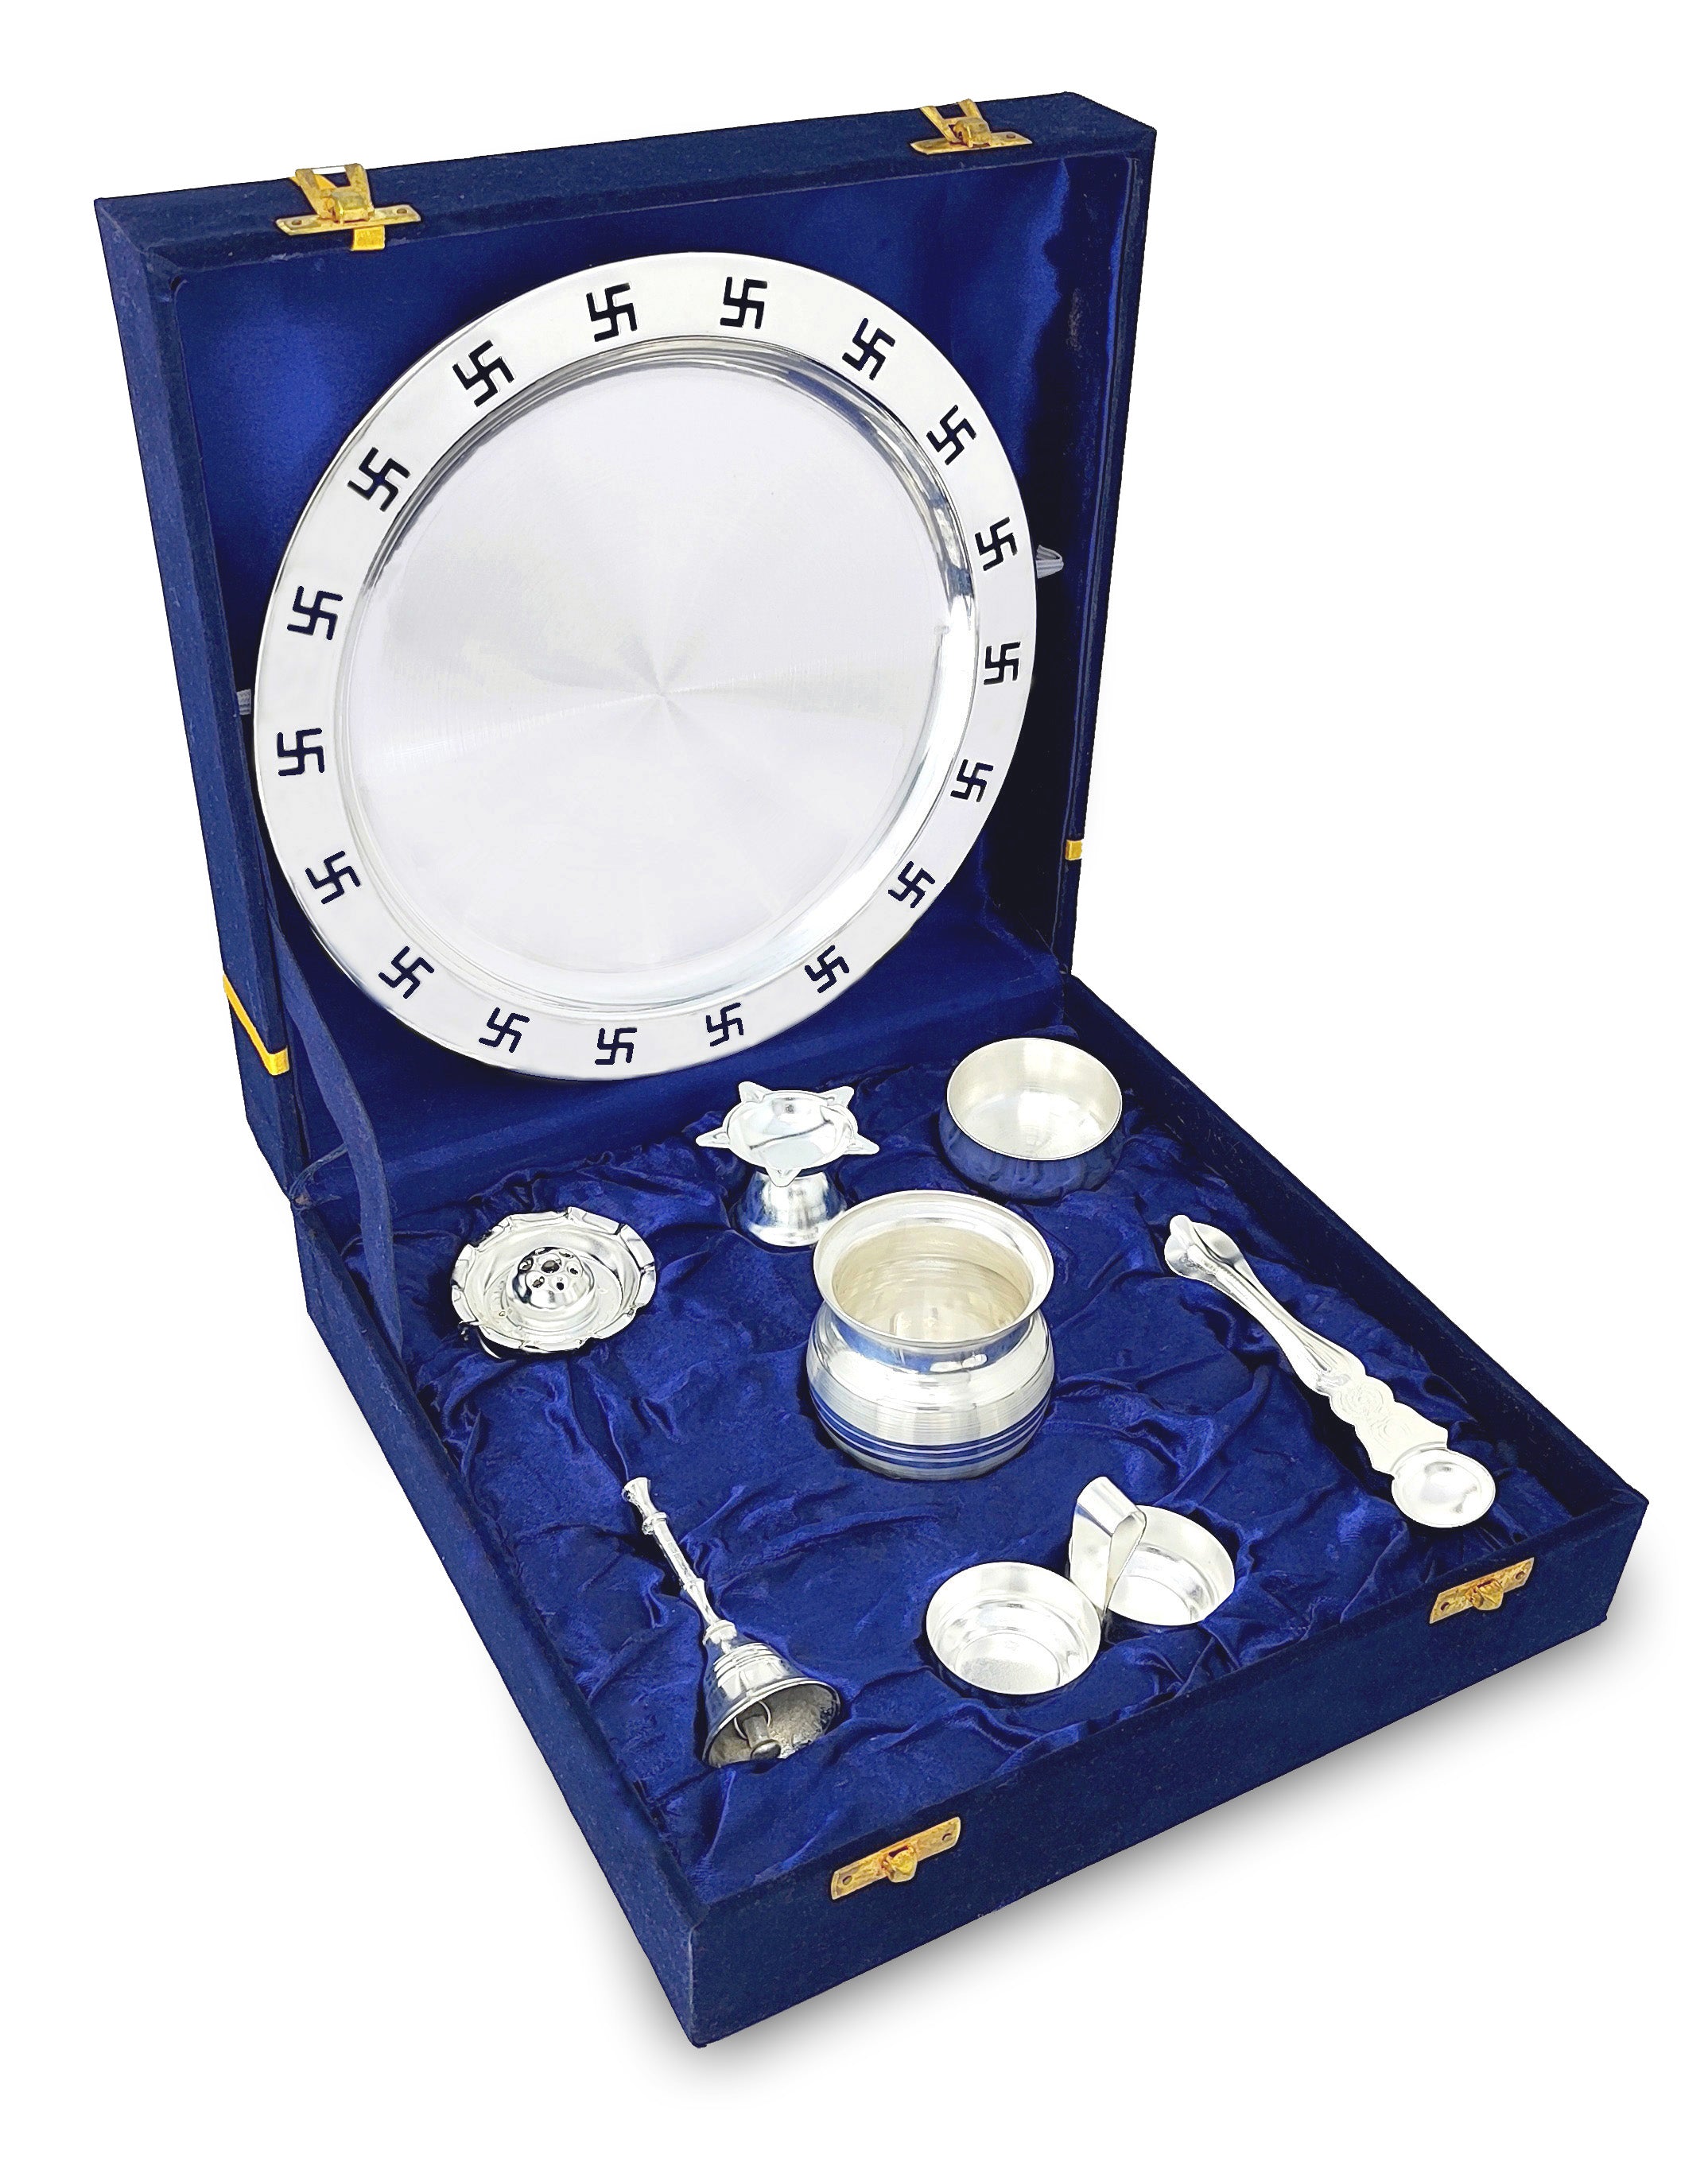 BENGALEN Pooja Thali Set Silver Plated with Blue Gift Box